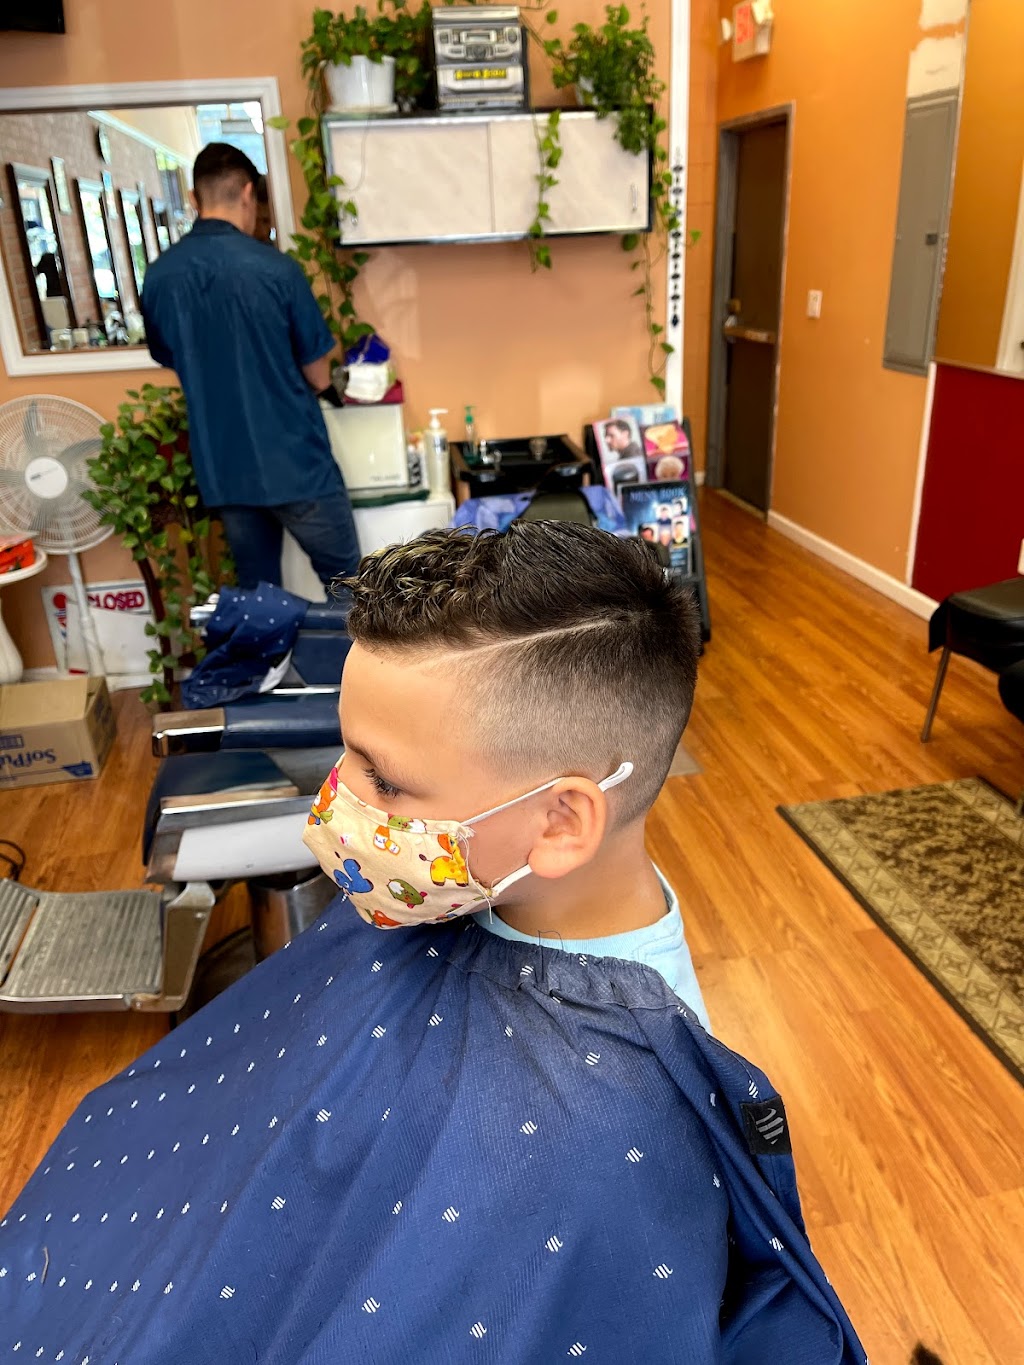 New Roc Barbering & Hairstyling | 123 Pelham Rd, New Rochelle, NY 10805 | Phone: (914) 654-1560